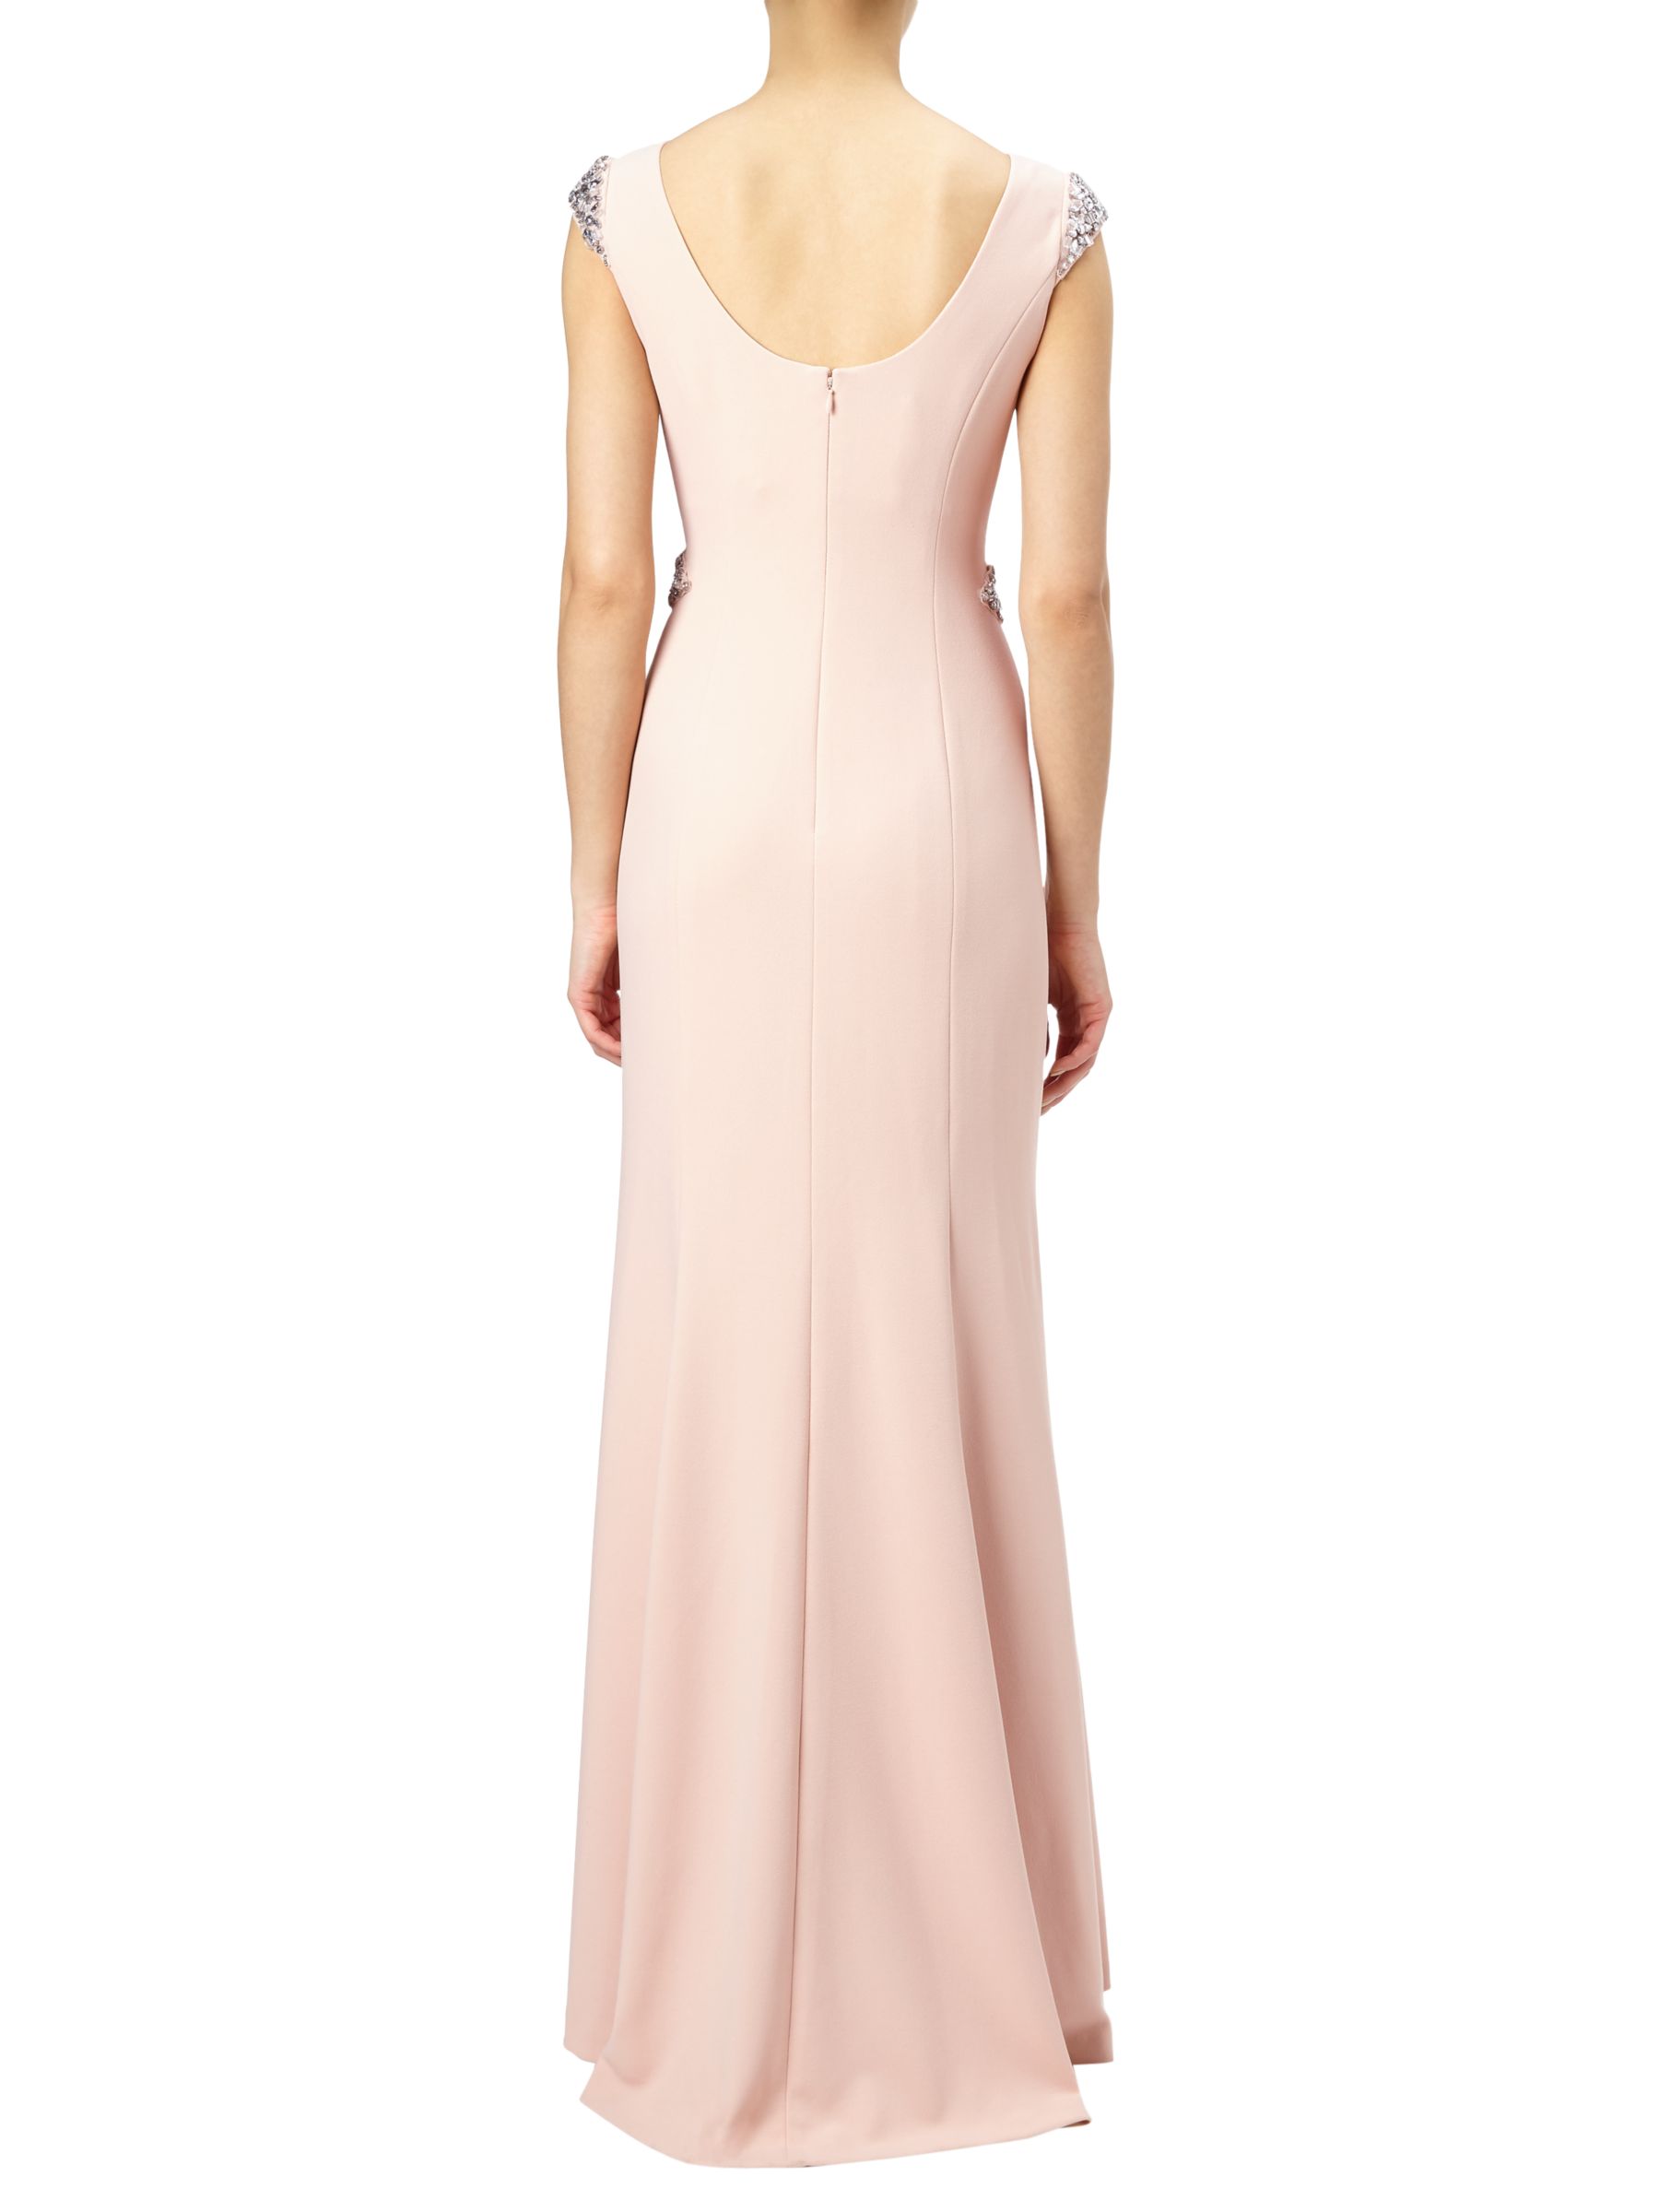 Adrianna Papell Cap Sleeve Crepe Mermaid Gown, Blush at John Lewis ...